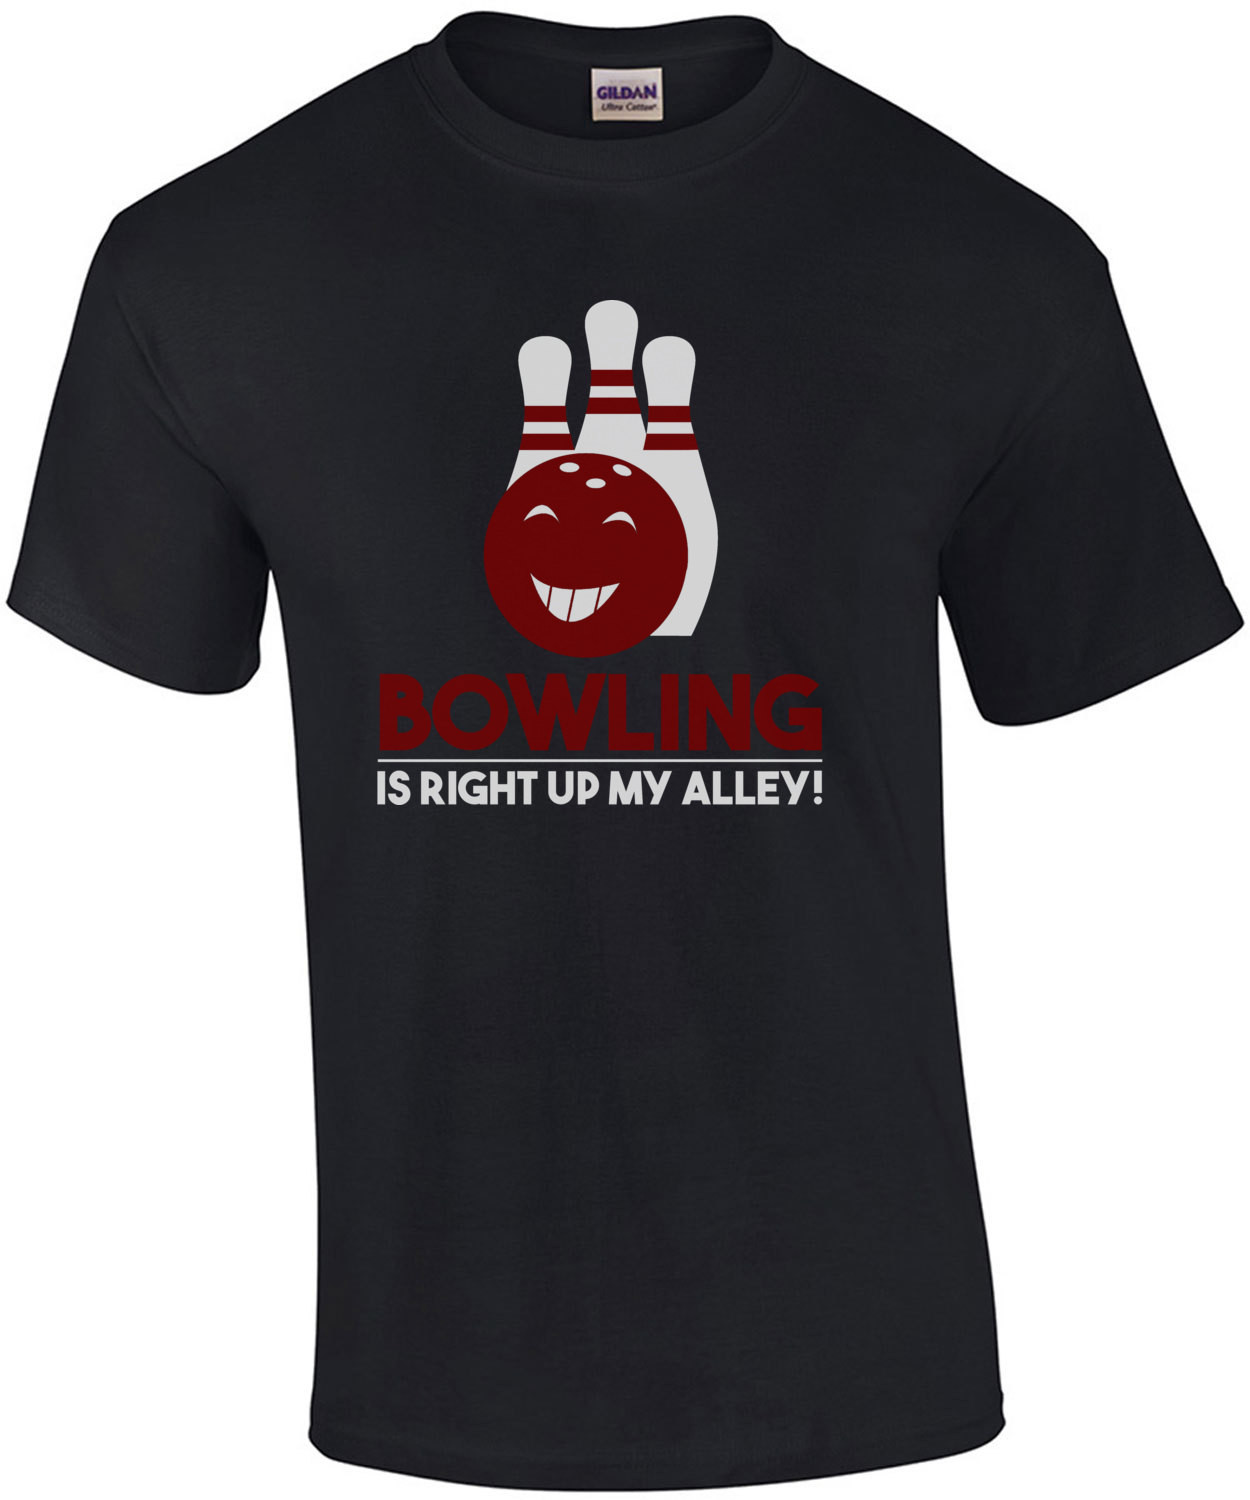 Bowling is right up my alley - funny bowling pun t-shirt